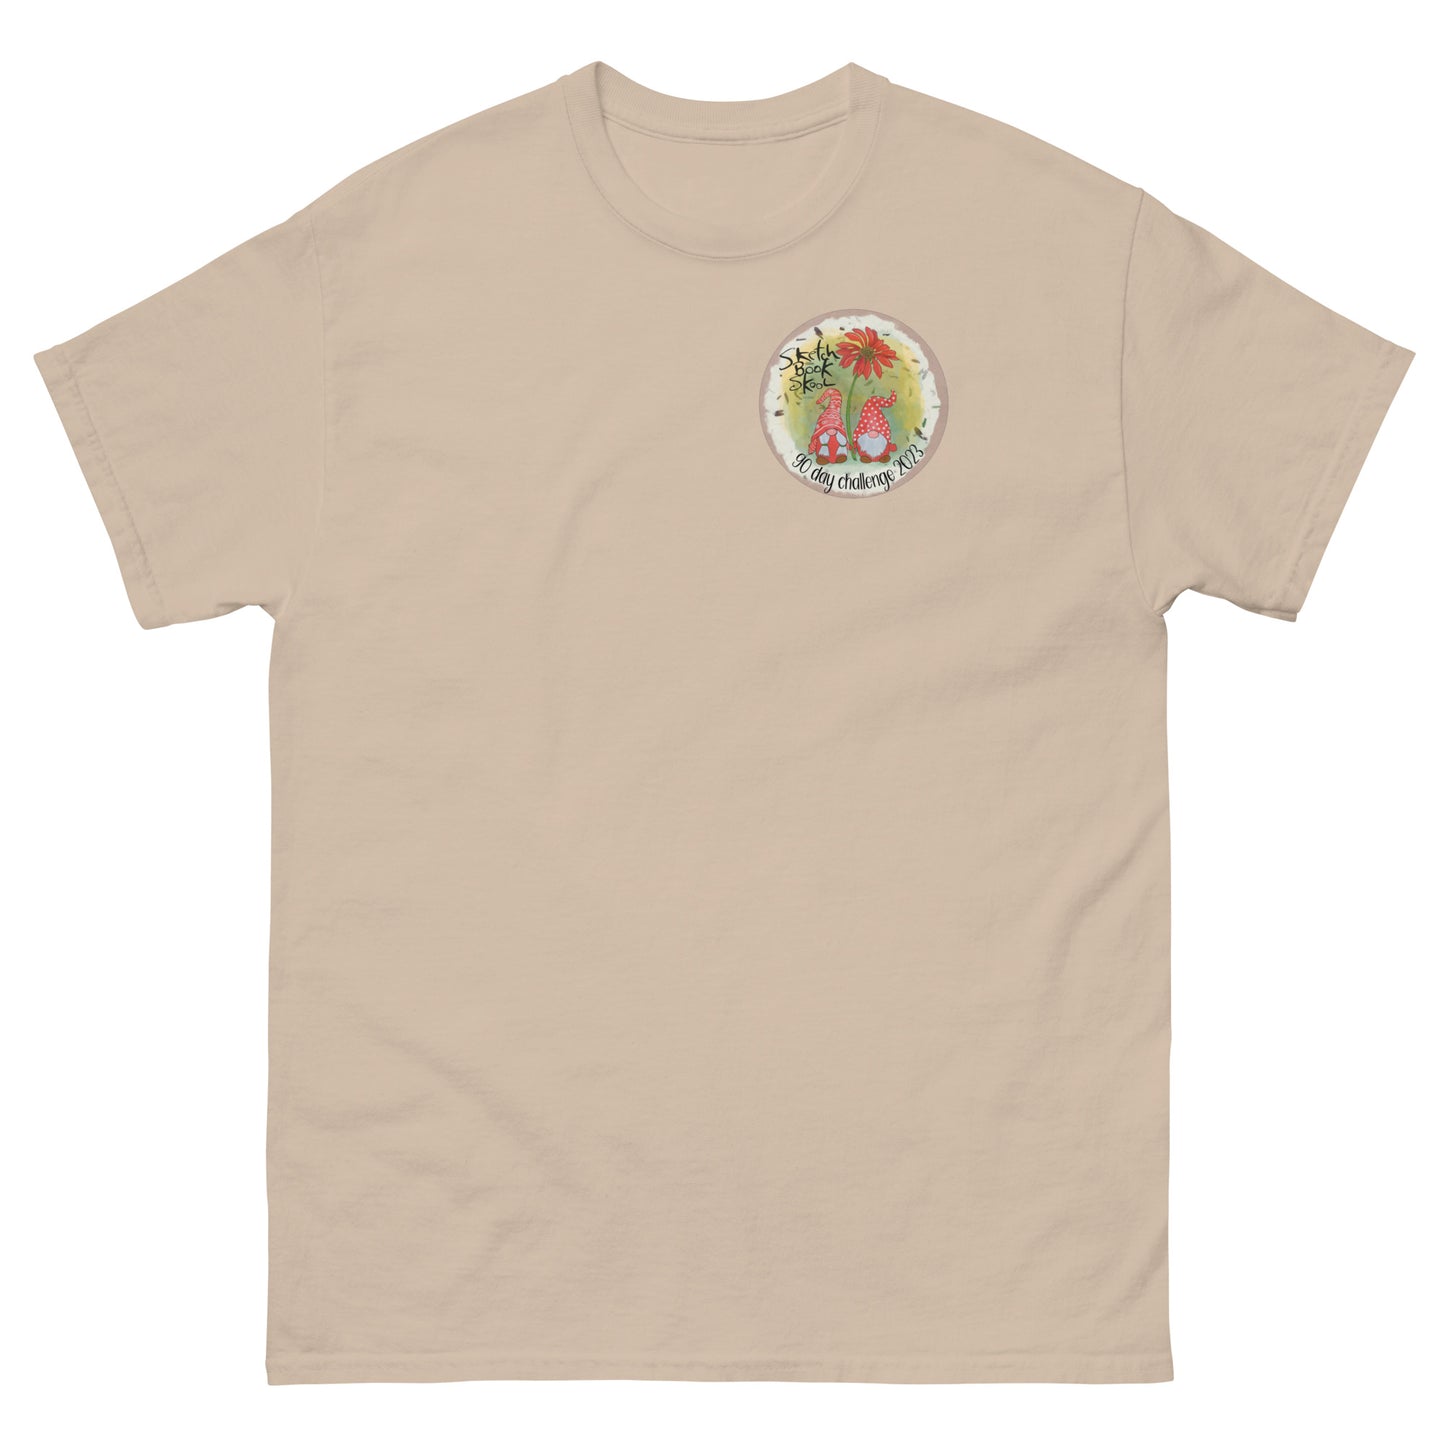 90 Day Challenge Gnome classic tee